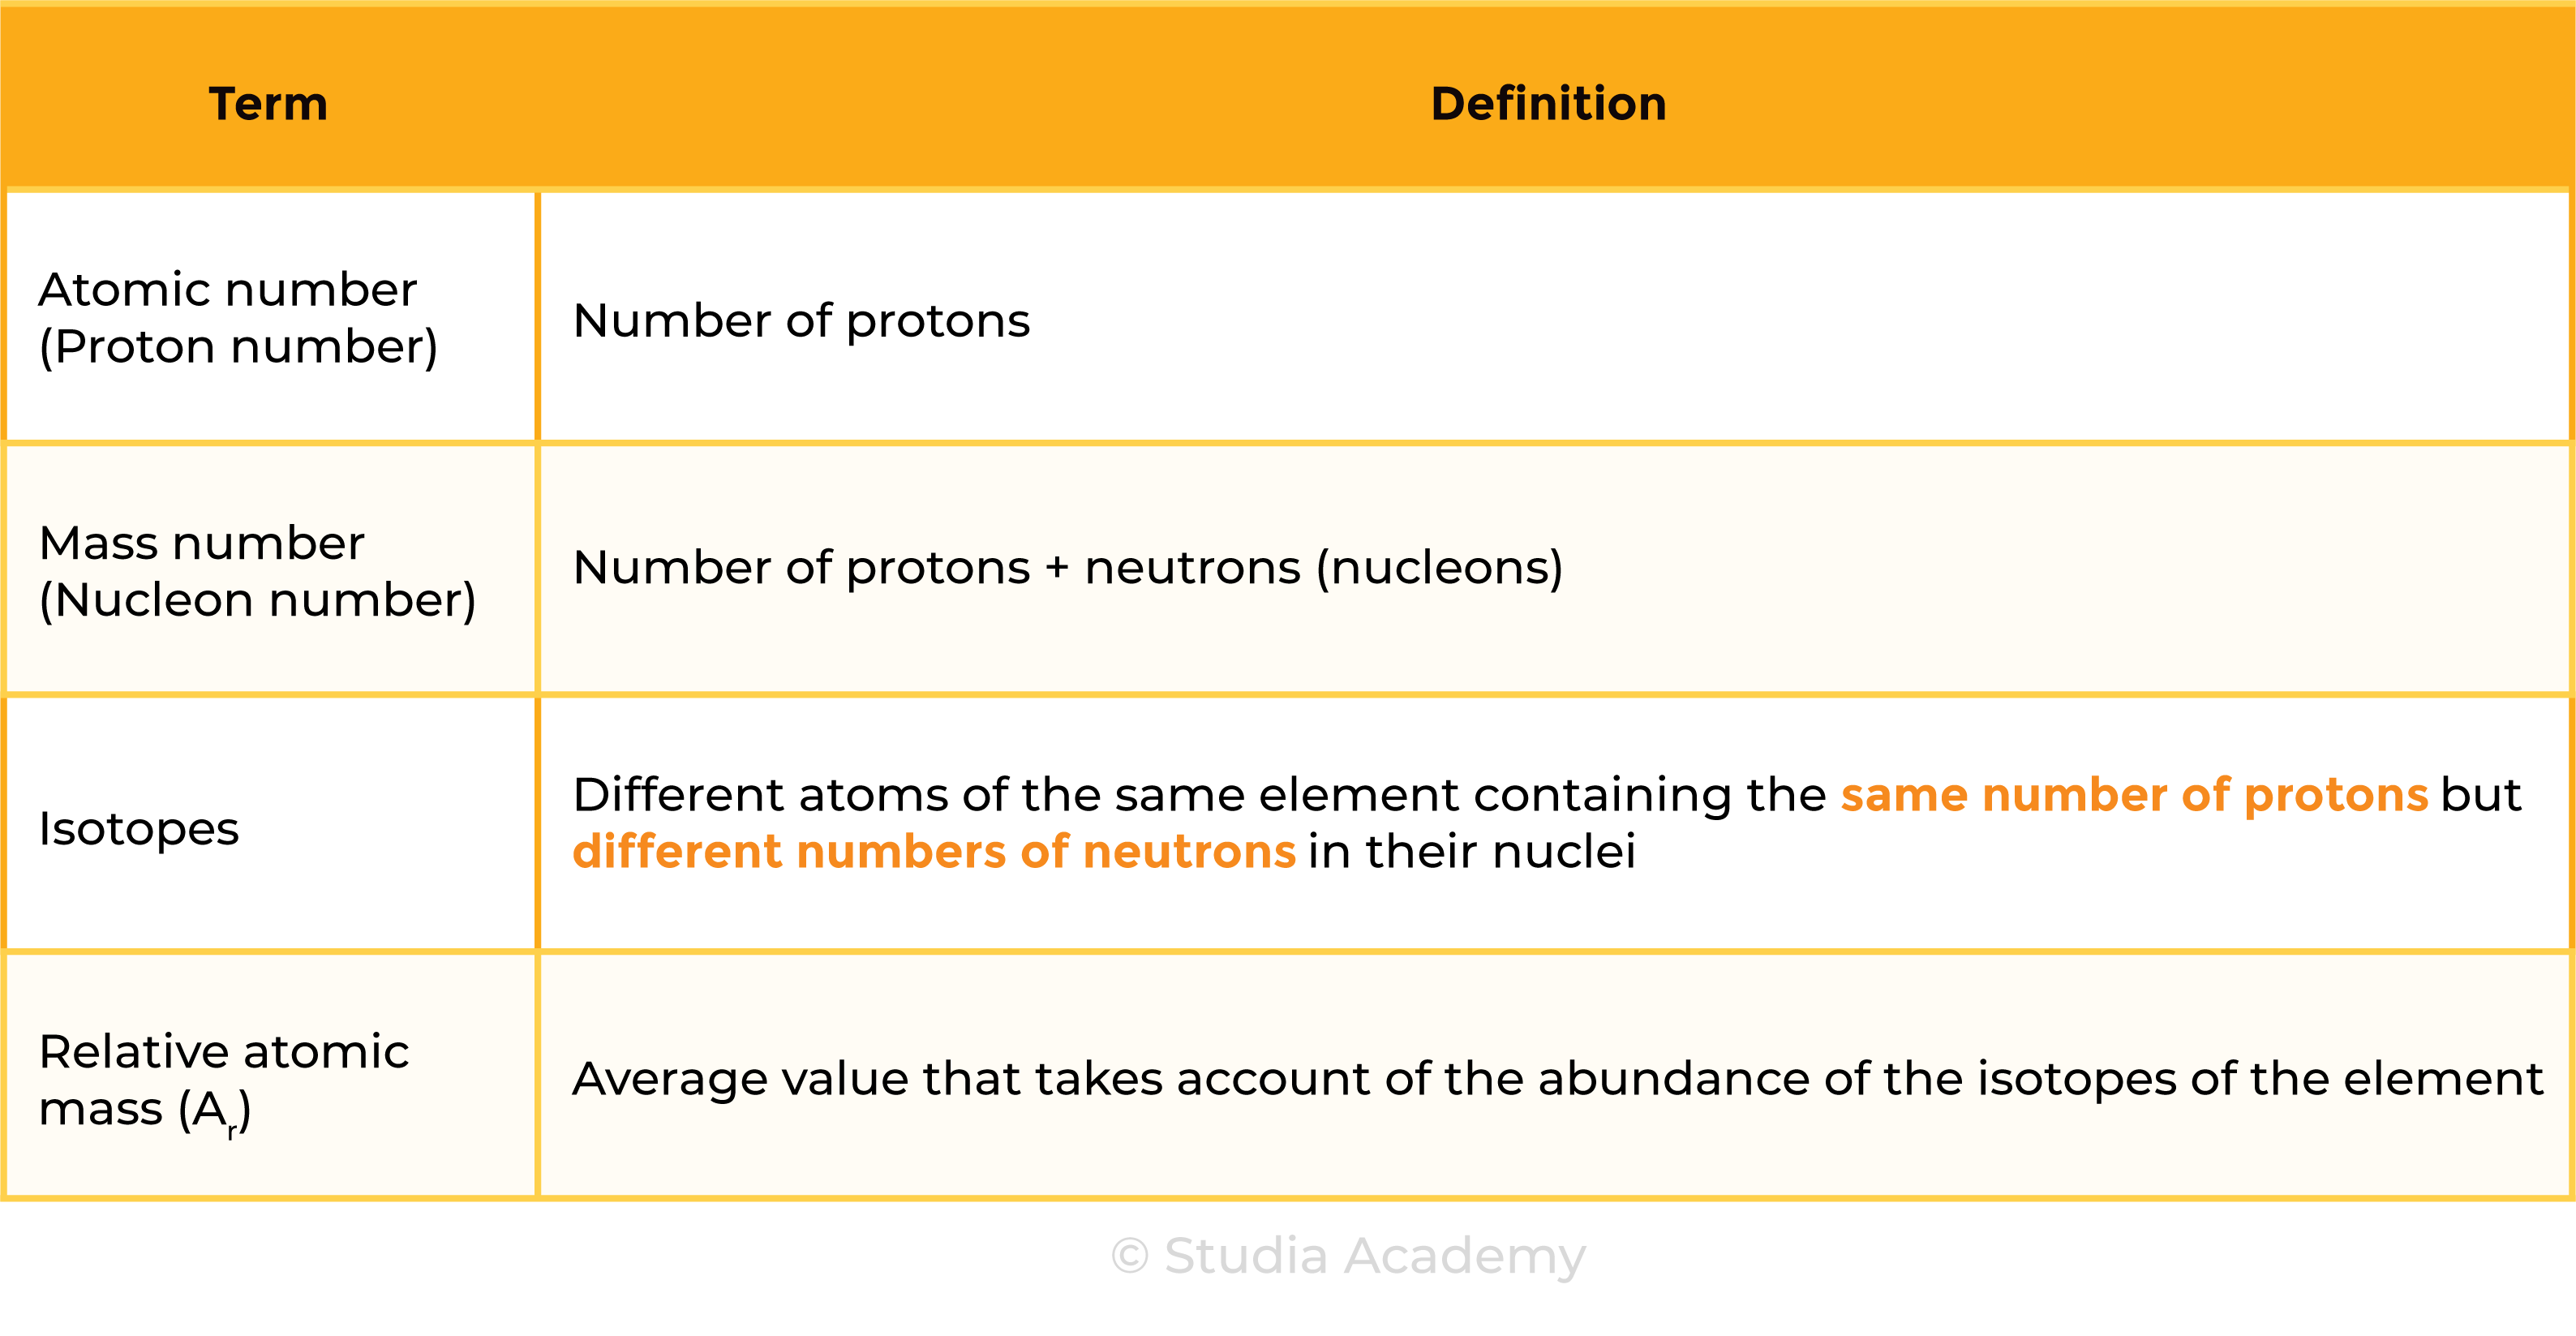 edexcel_igcse_chemistry_topic 03 tables_atomic structure_003_atomic structure key terms